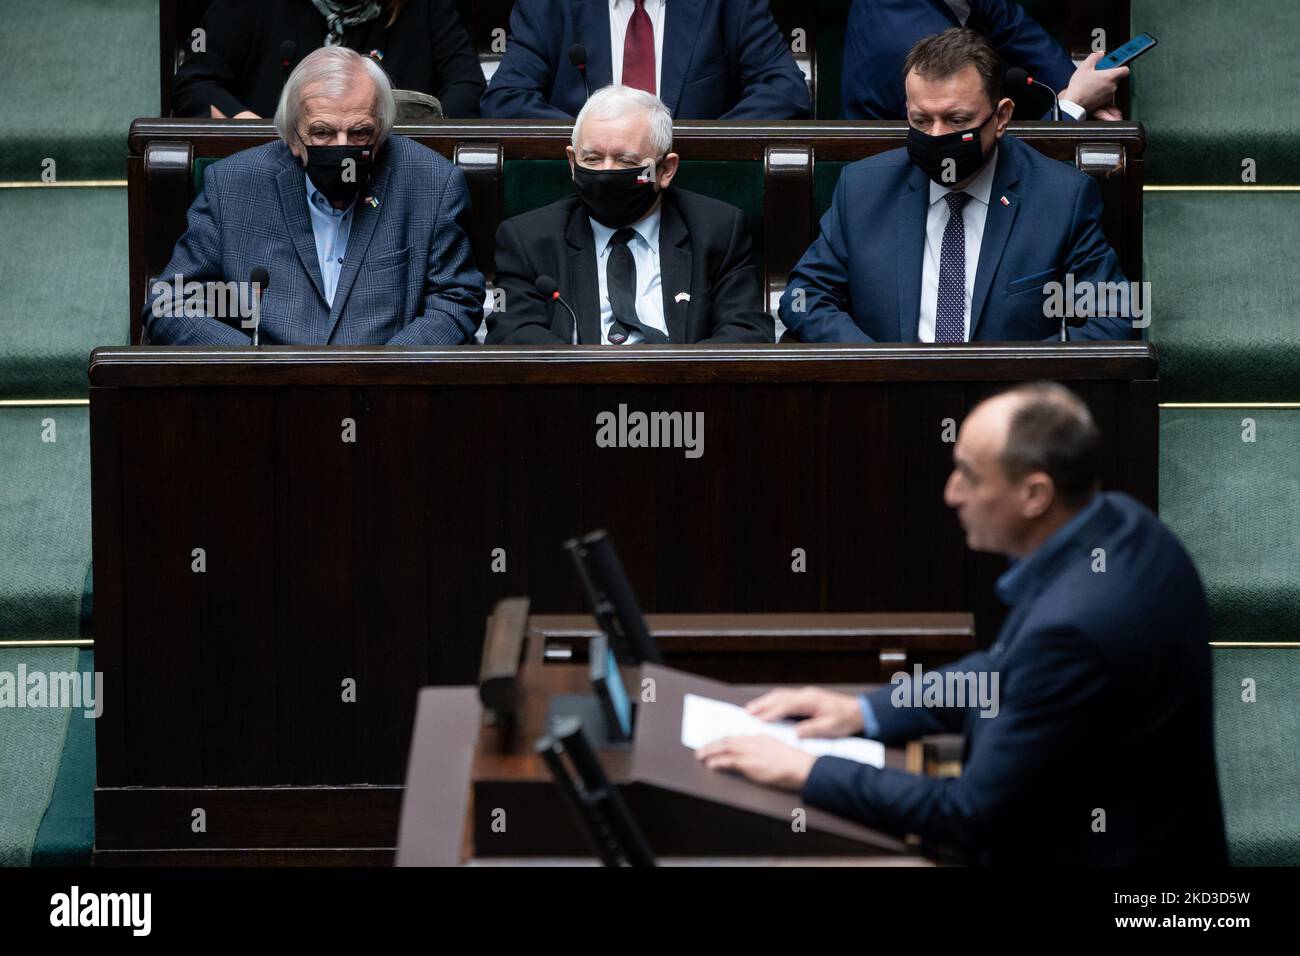 Leader of the Polish Law and Justice (PiS) ruling party Jaroslaw Kaczynski (C), Polish Deputy Sejm Speaker Ryszard Terlecki (L) and Polish Defense Minister Mariusz Blaszczak (R) and Leader of Kukiz'15 Pawel Kukiz (Front), during the 49th session of the Sejm (lower house) in Warsaw, Poland, on 24 February 2022. Polish Parliament has passed a resolution condemning Russian aggression against Ukraine and calling on the international community to impose tough sanctions on Moscow. (Photo by Mateusz Wlodarczyk/NurPhoto) Stock Photo